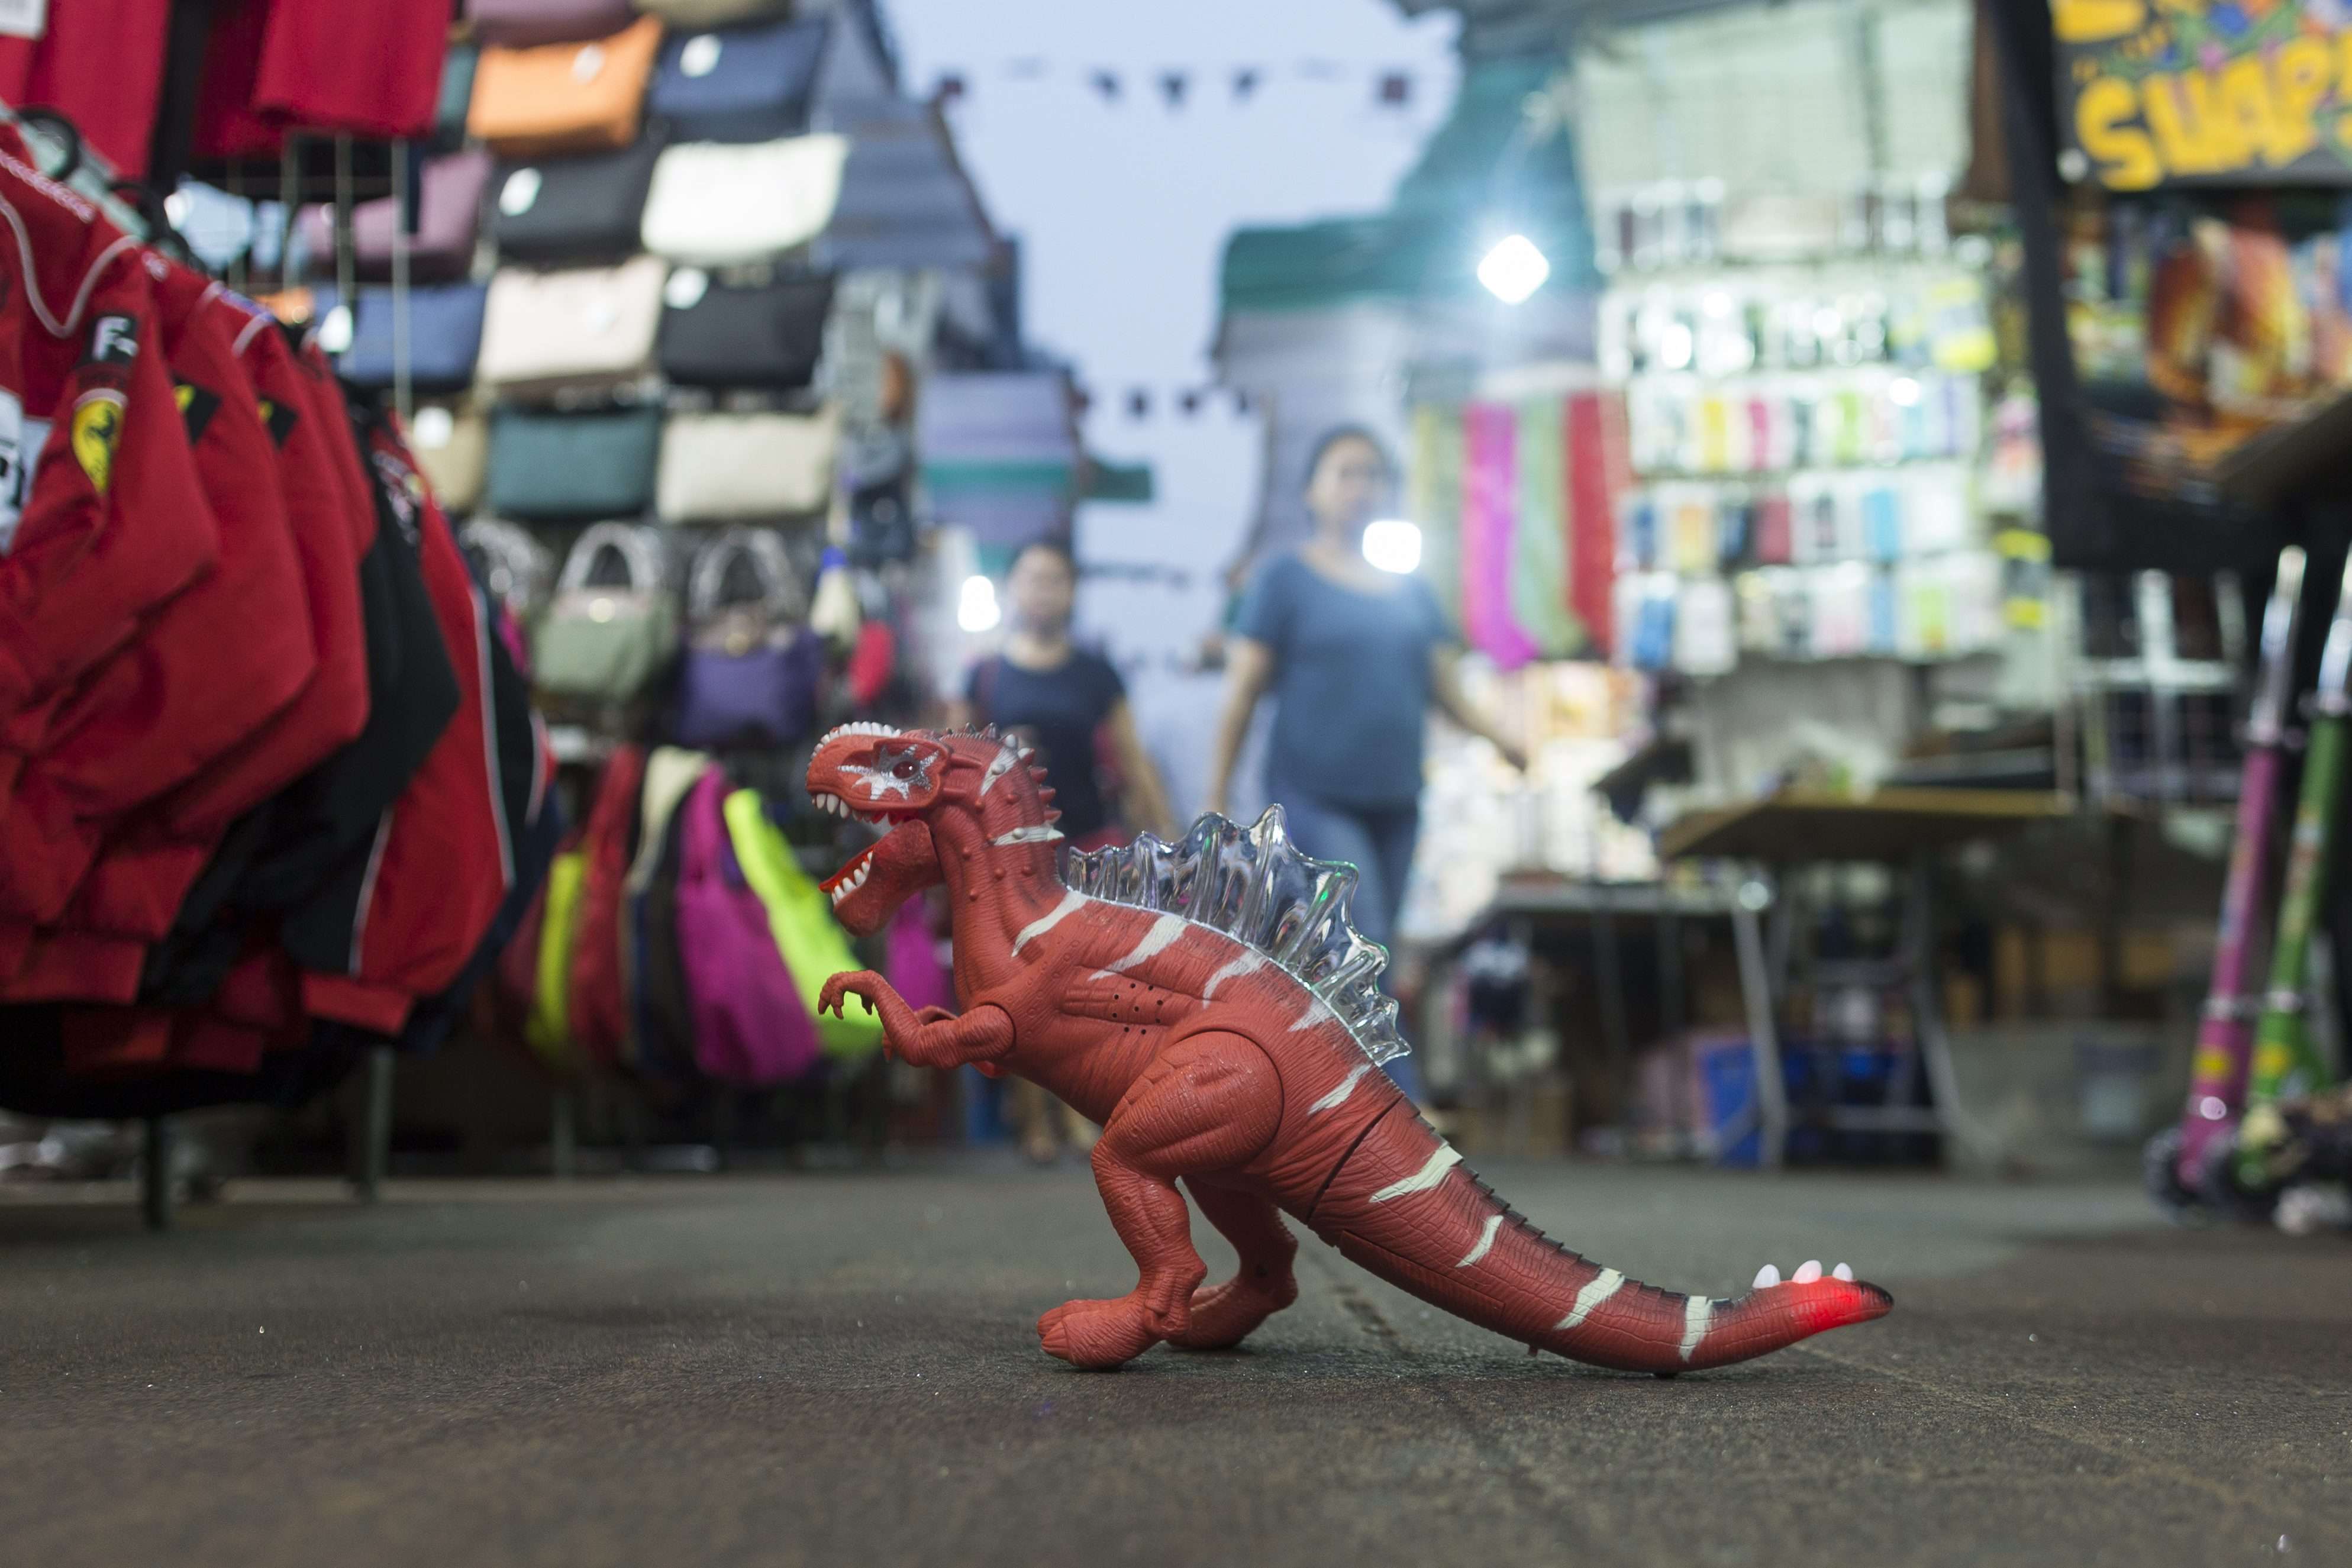 A toy dinosaur for sale at Hong Kong’s Temple Street night market. When Hong Kong’s economic growth hits a wall, the government must lead to invest in our future. Photo: EPA